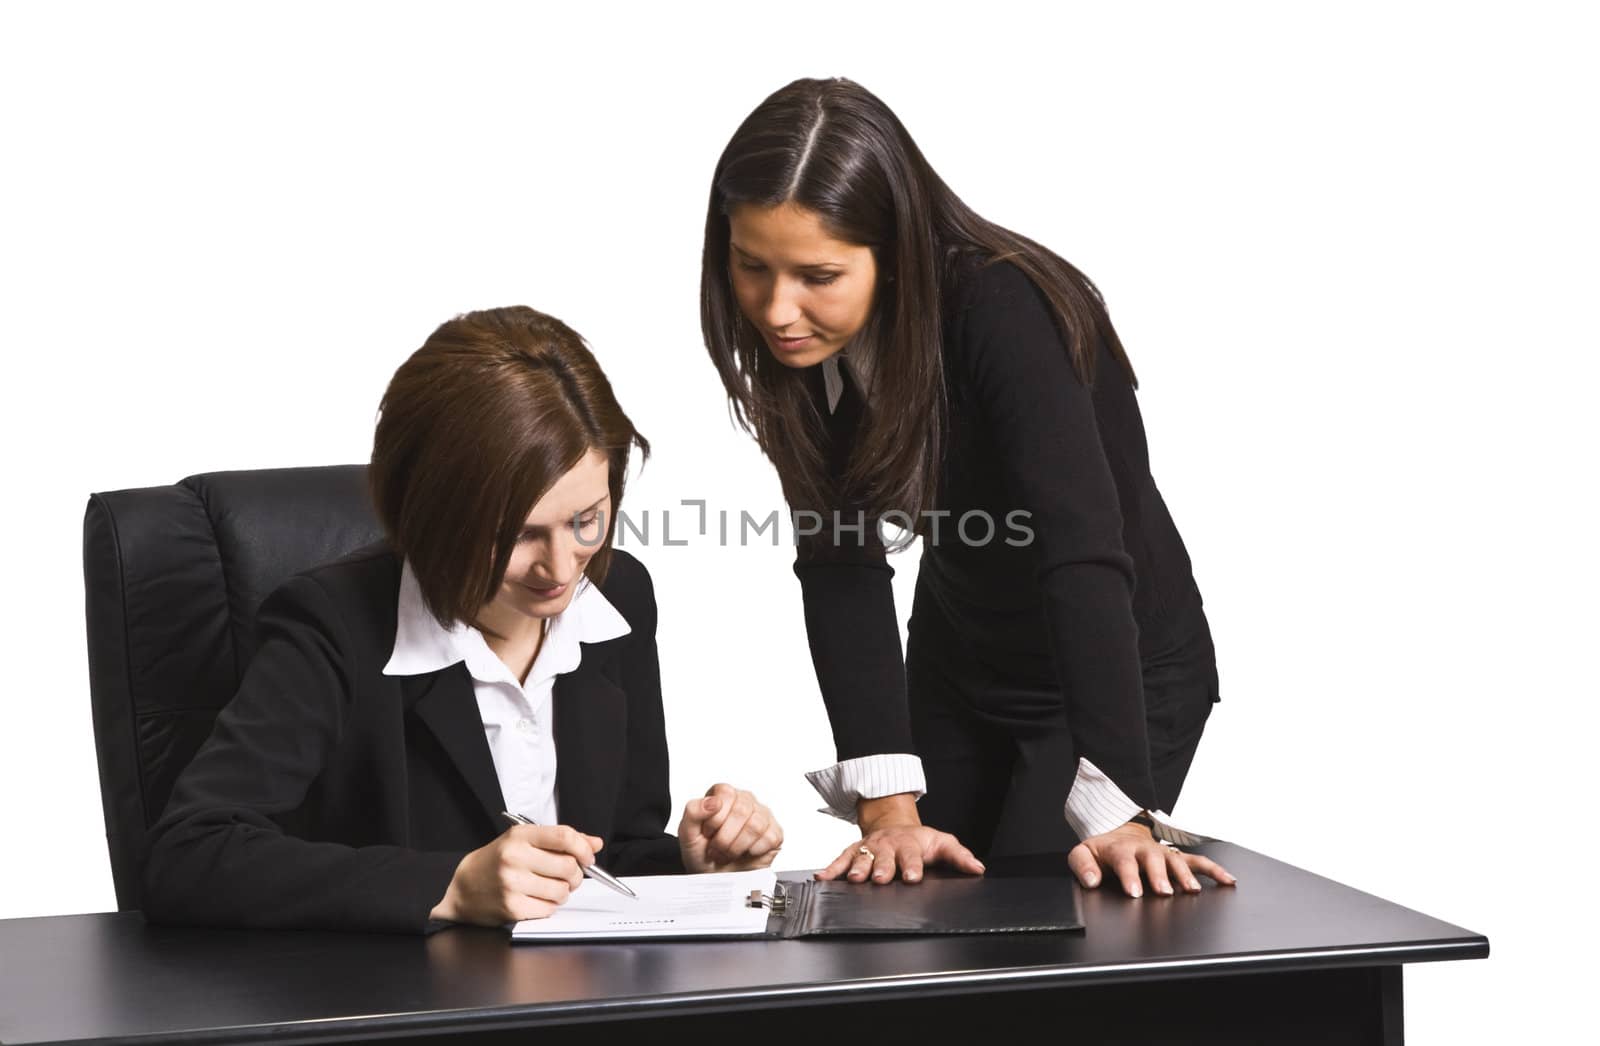 Two businesswomen working together in an office.